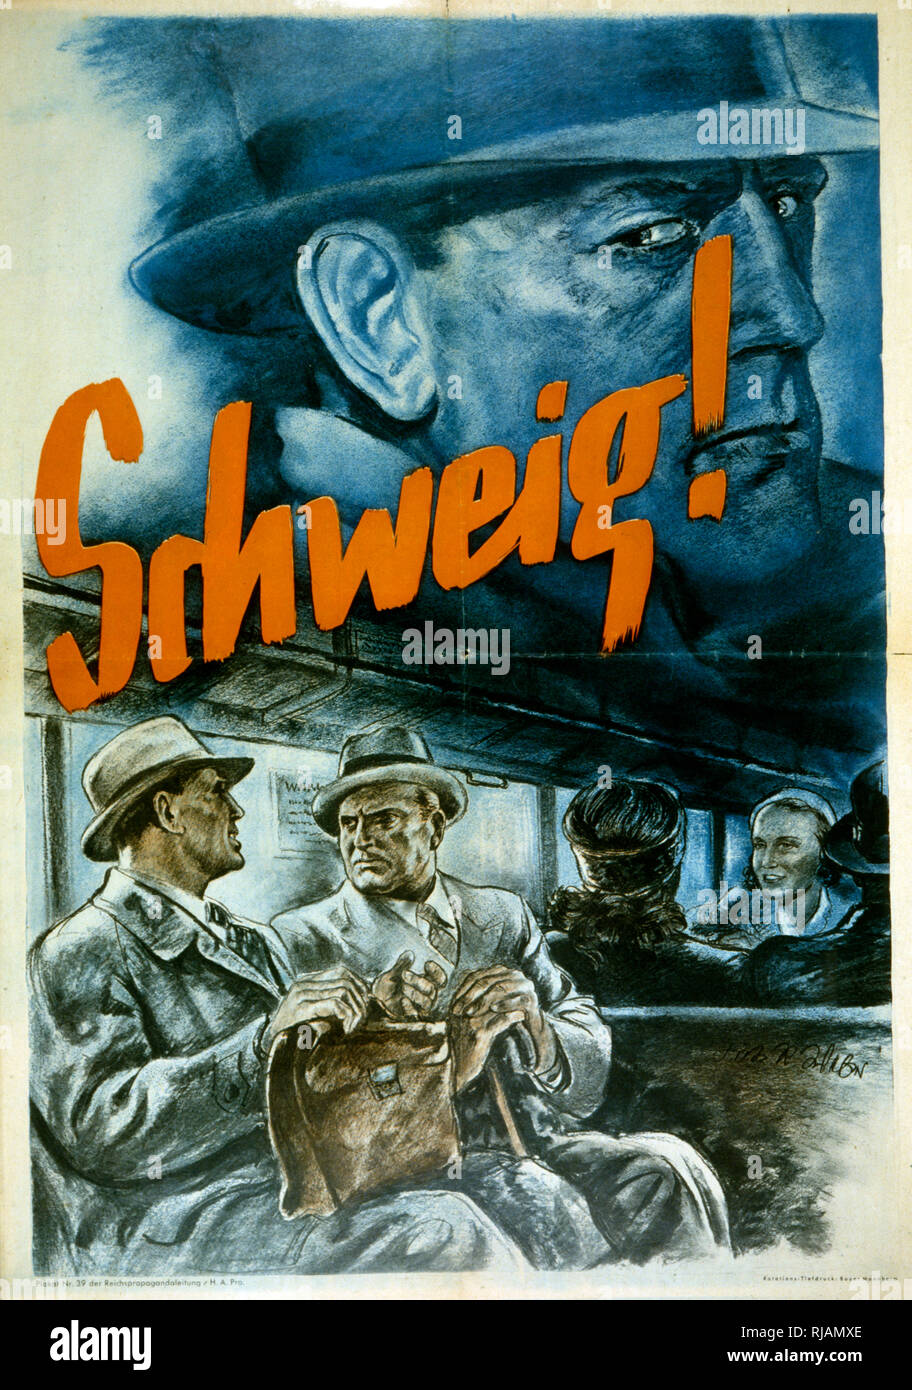 World War Two Nazi propaganda poster calling for silence to avoid giving information to spies. Stock Photo